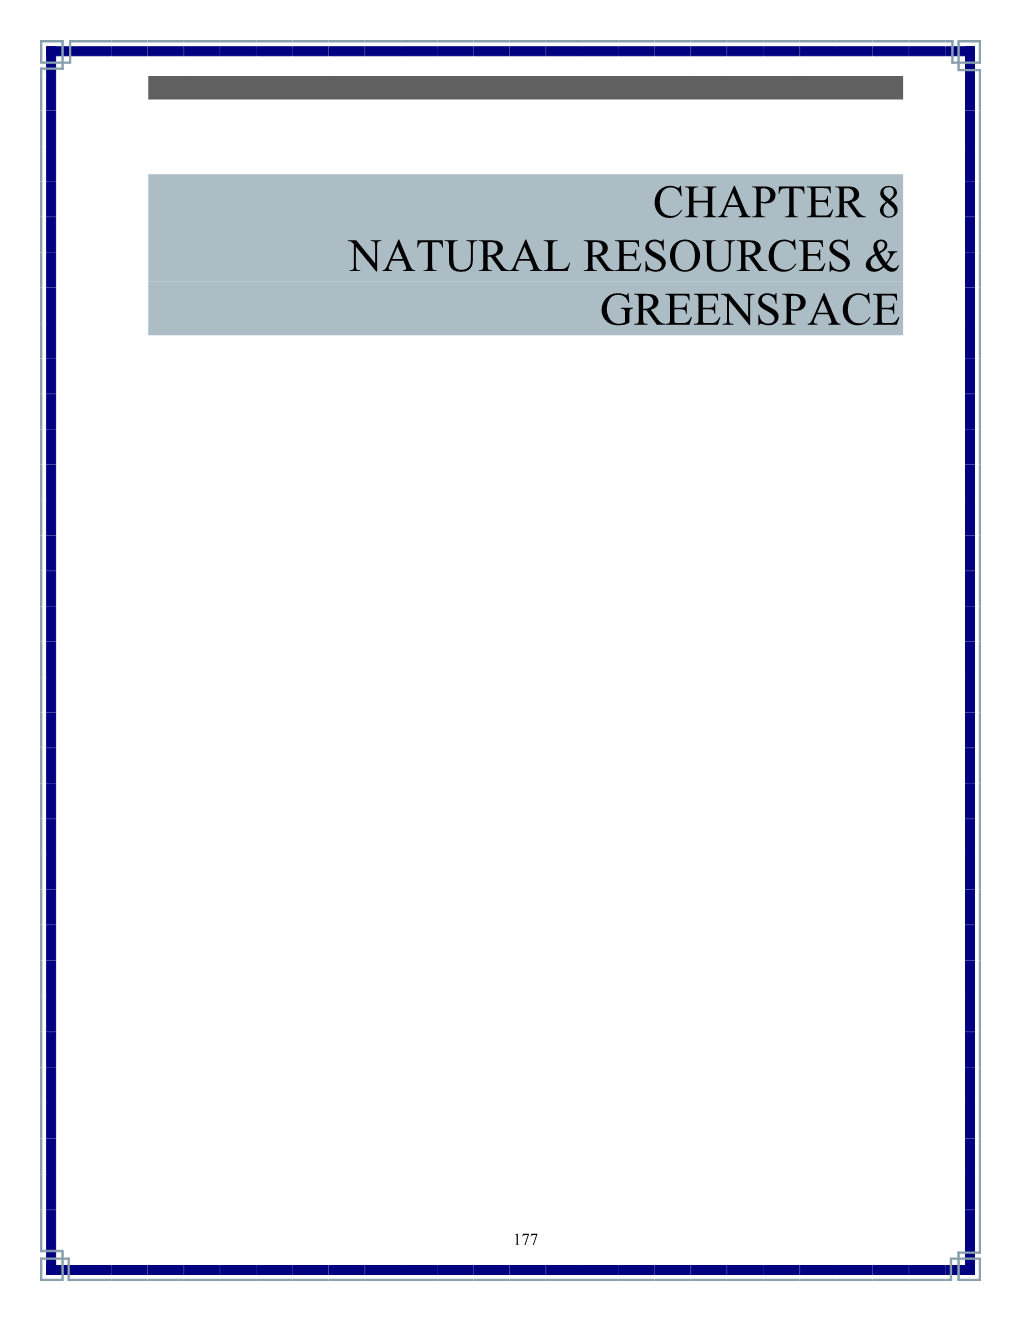 Chapter 8 Natural Resources & Greenspace